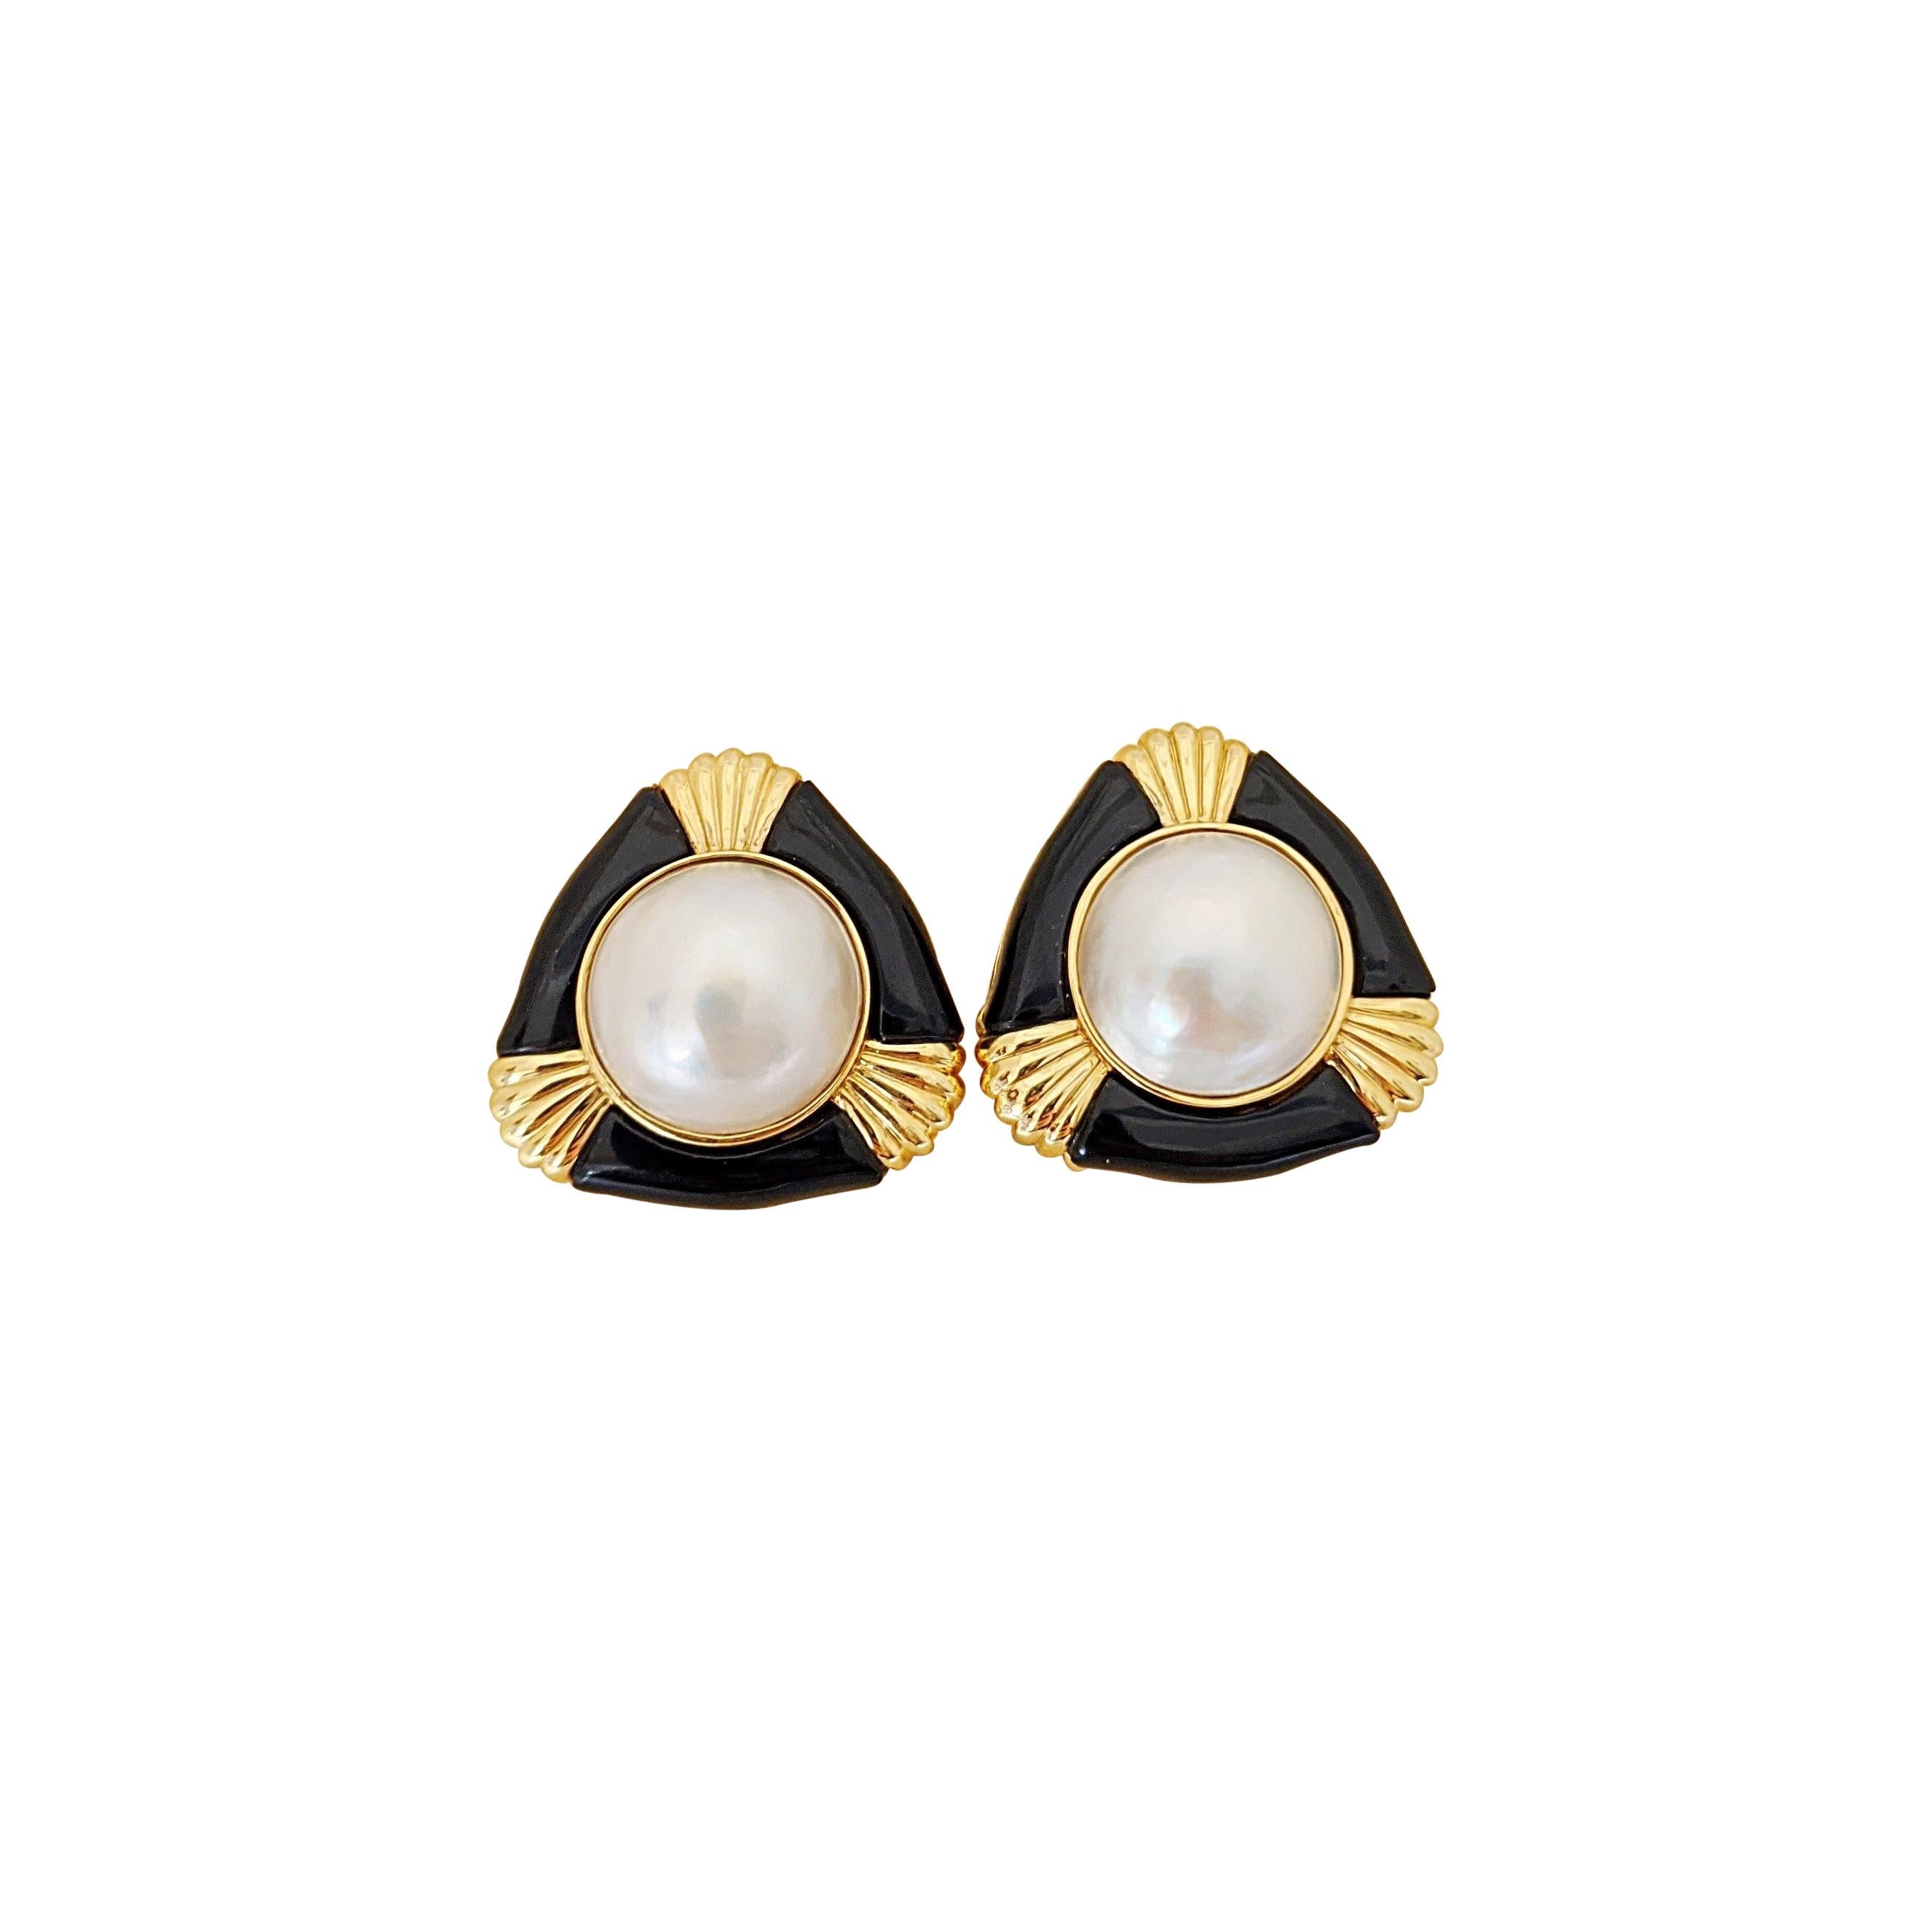 14 Karat Yellow Gold Earrings with Mabe Pearl and Black Onyx